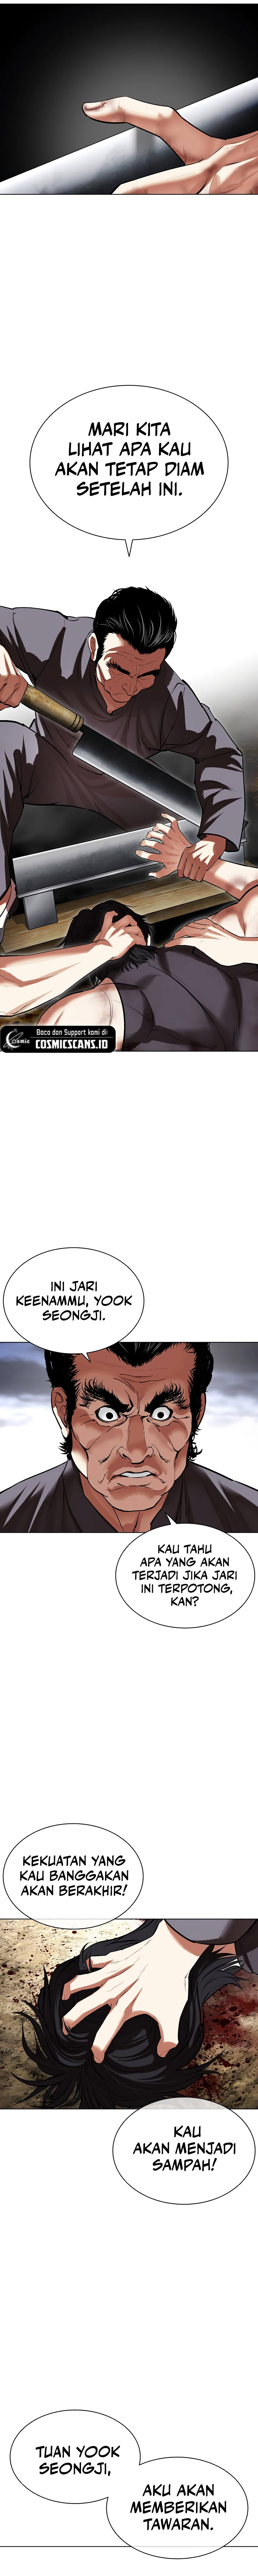 Lookism Chapter 492 Image 17